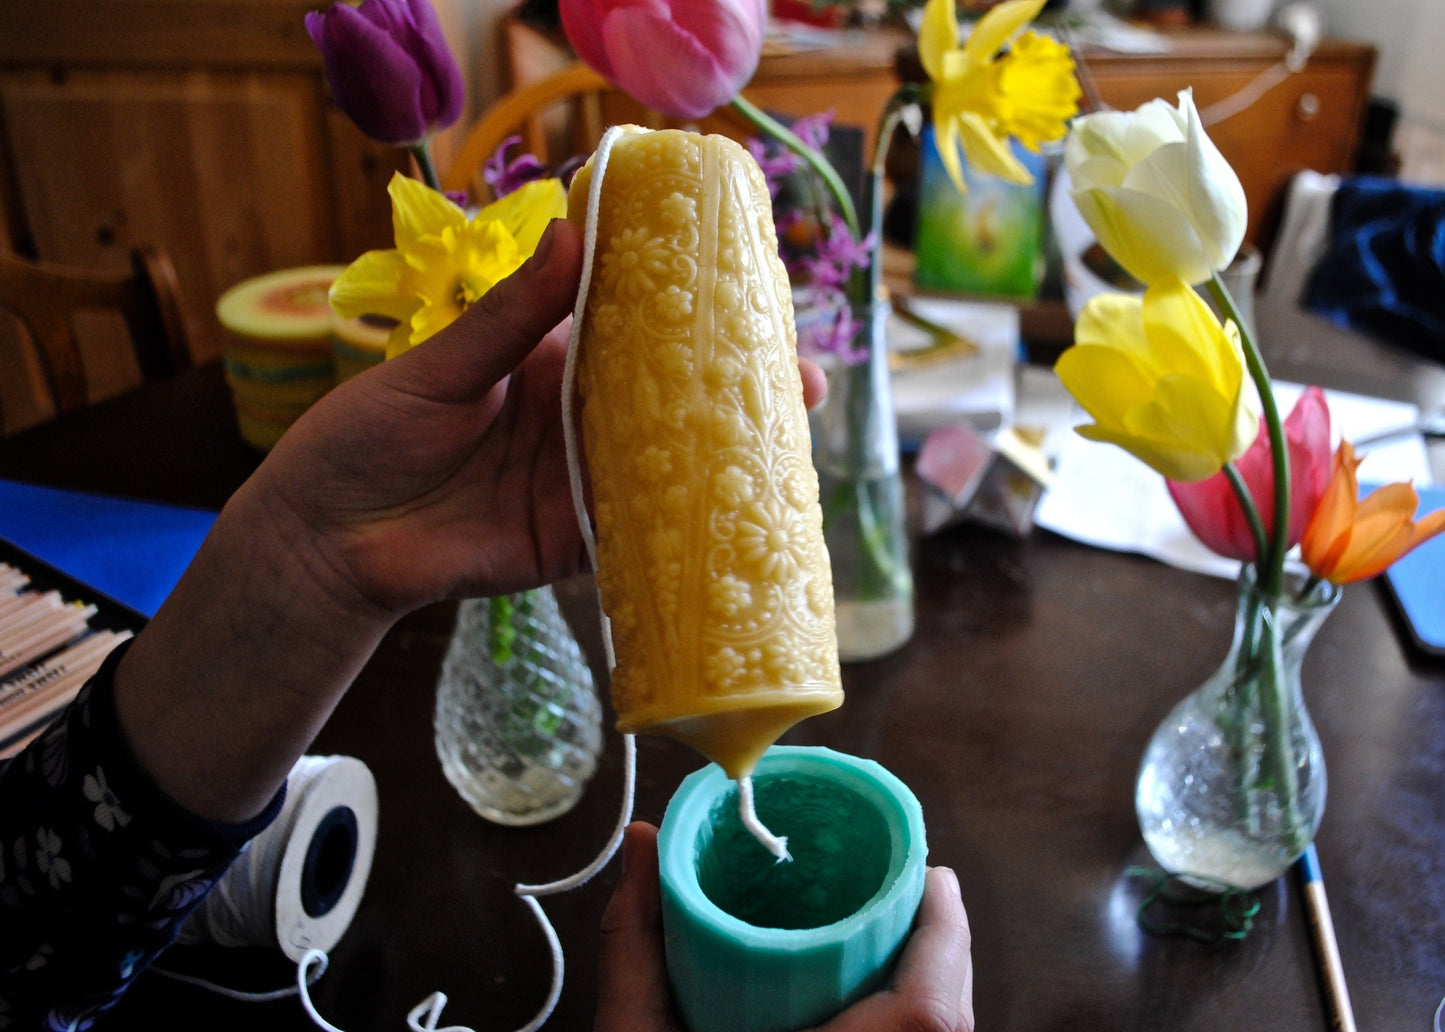 Cream Beeswax 1800s Flower // Pillar Candle Cast from Actual Candle from 1800s / Beeswax Candle, Flowers